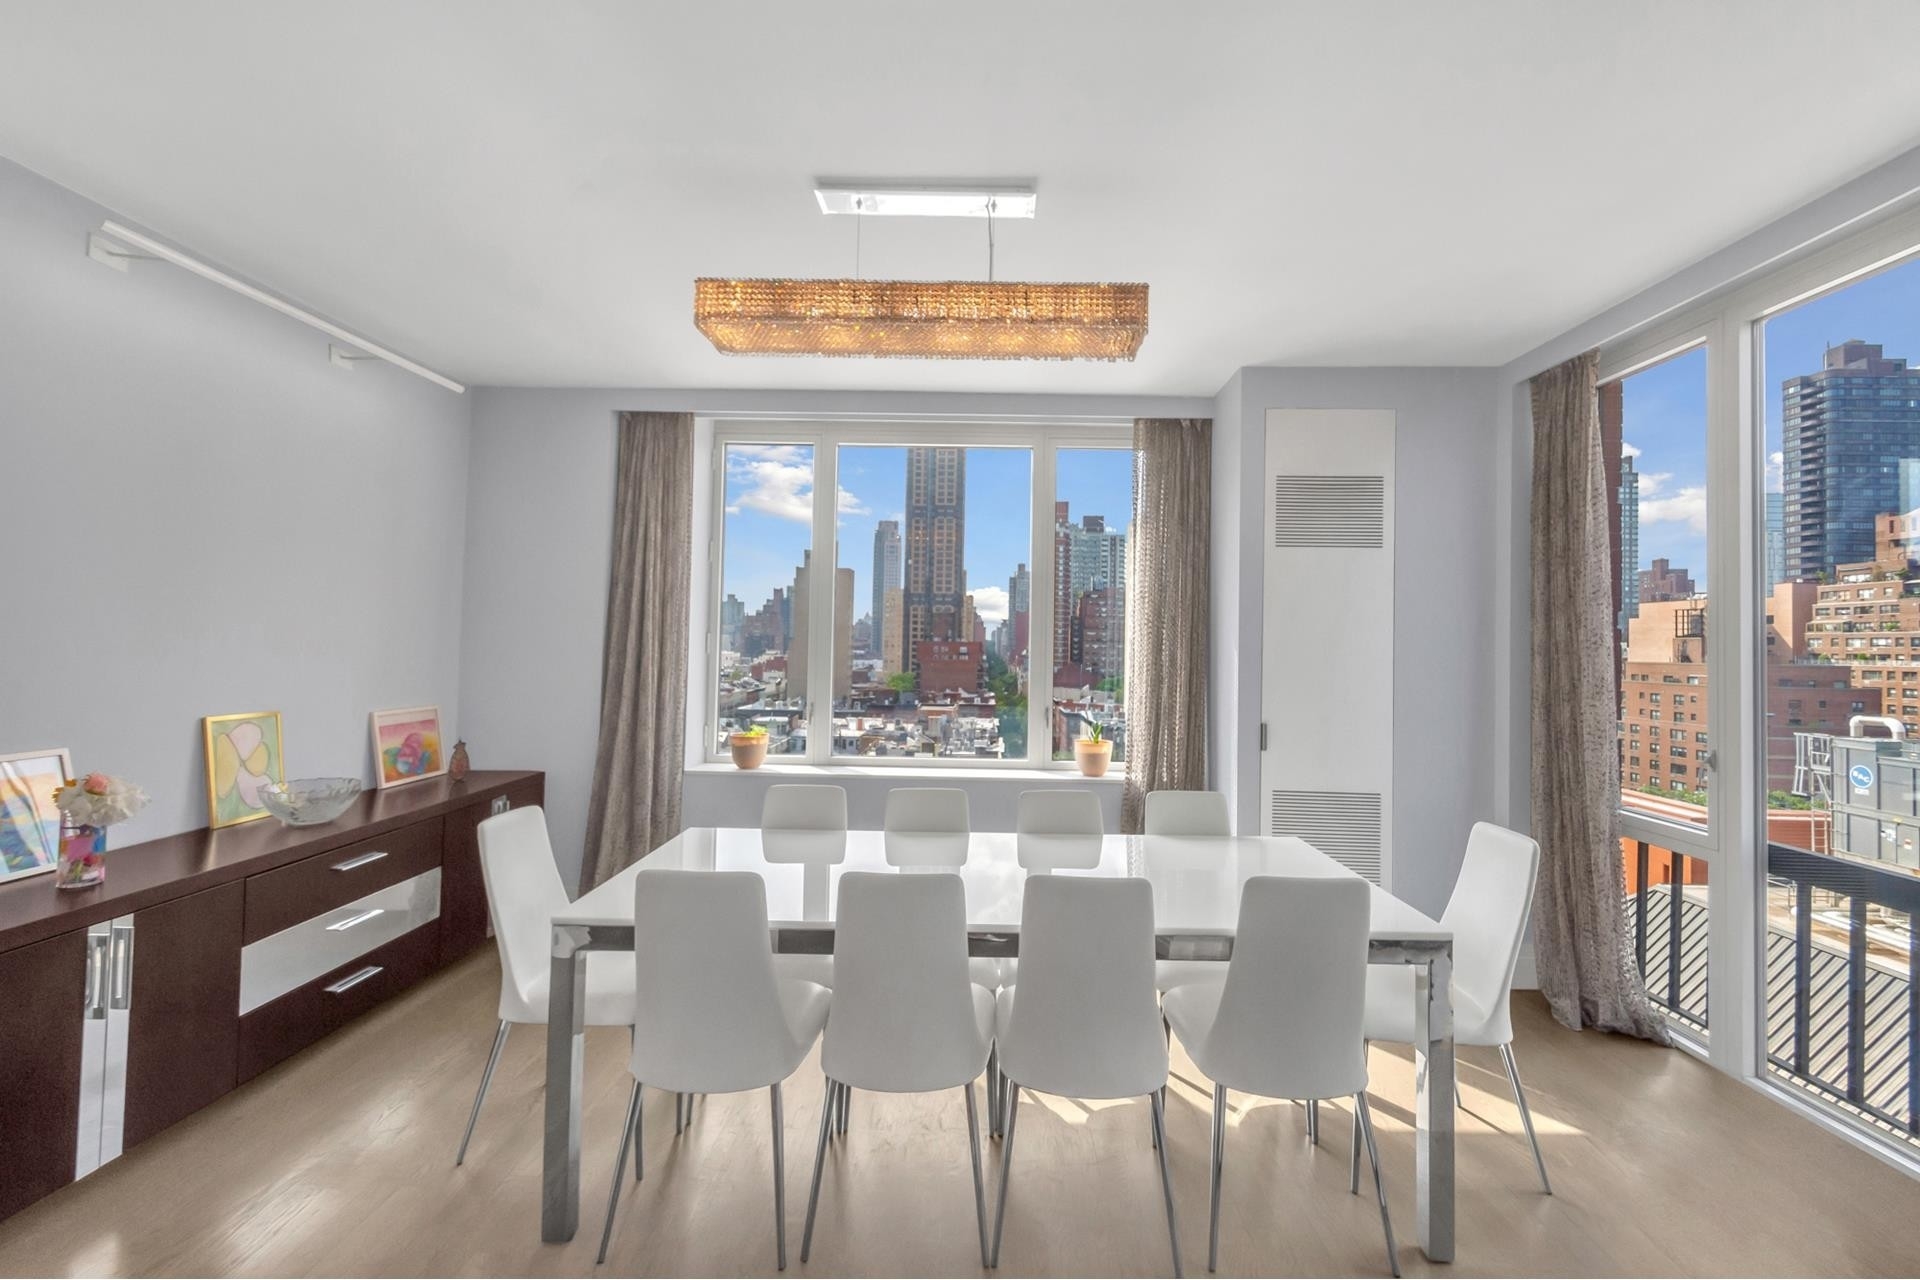 Condominium for Sale at 90 Eea, 90 E END AVE, 14B Yorkville, New York, New York 10028